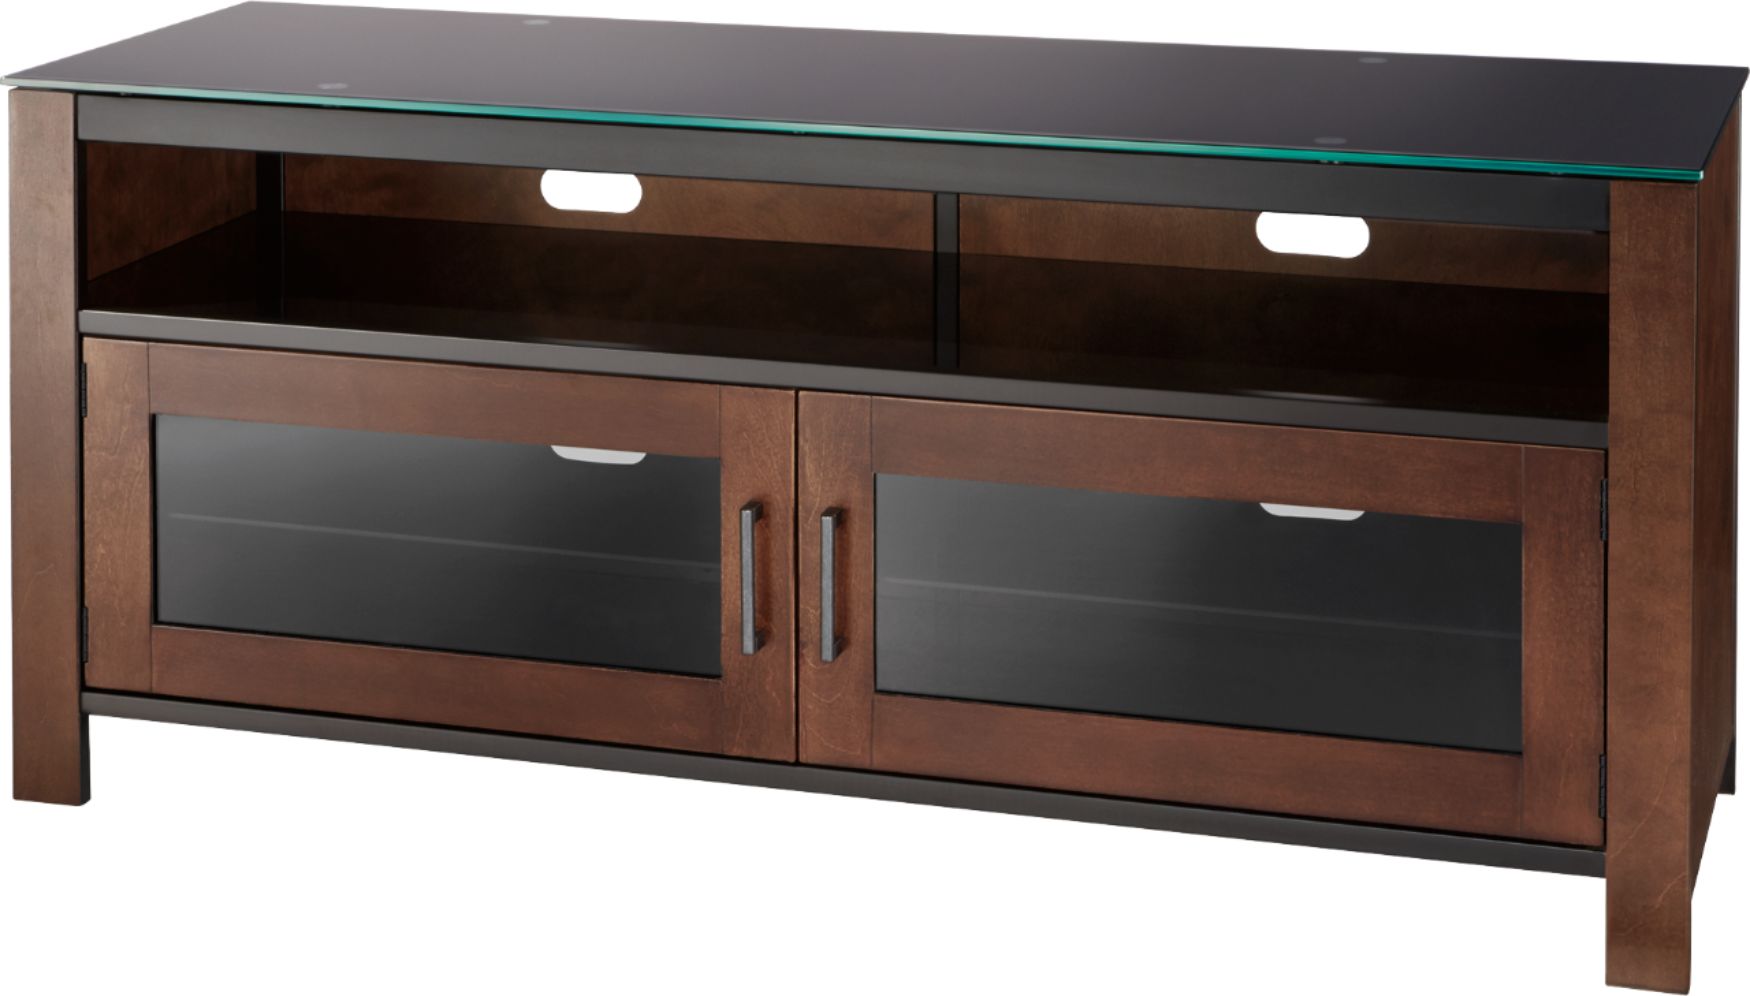 Insignia Tv Stand For Most Flat Panel Tvs Up To 60 Mocha Ns